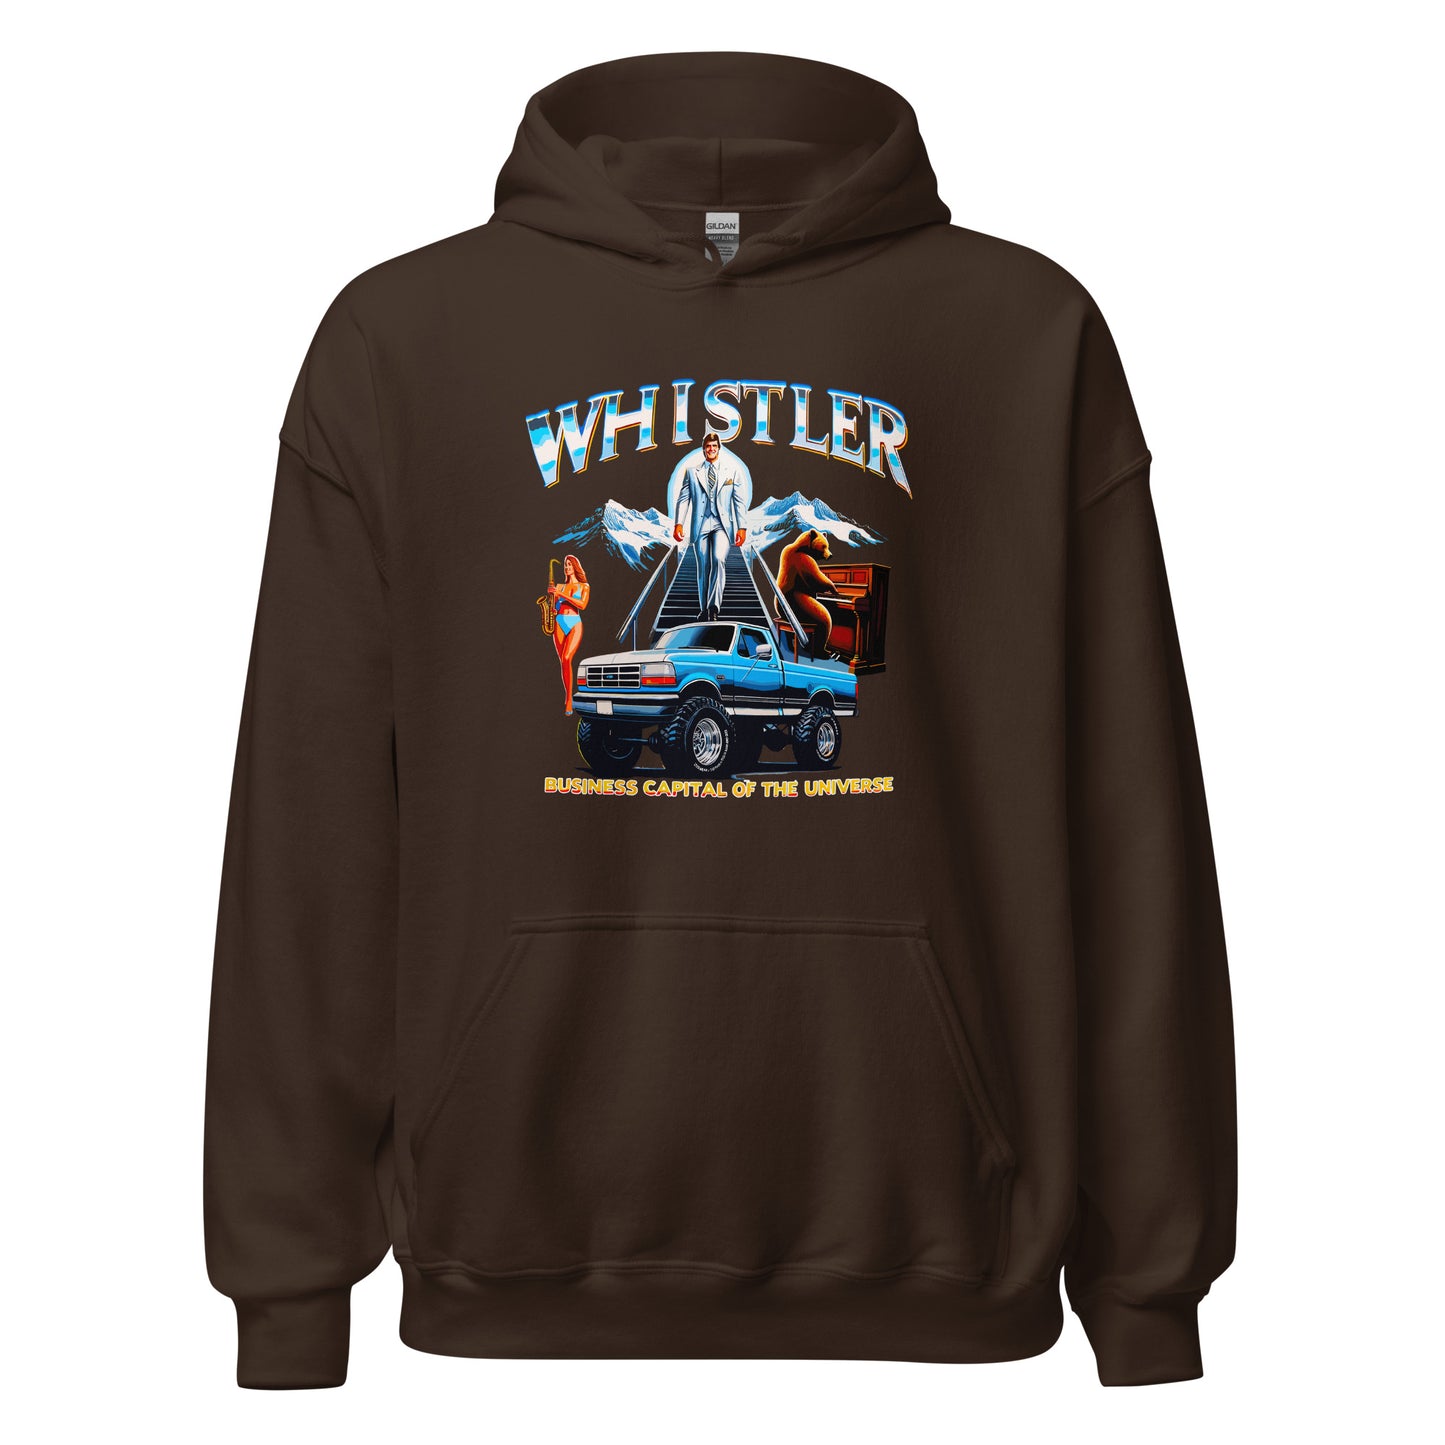 Whistler Business Capital of the Universe Hoodie printed by Whistler Shirts